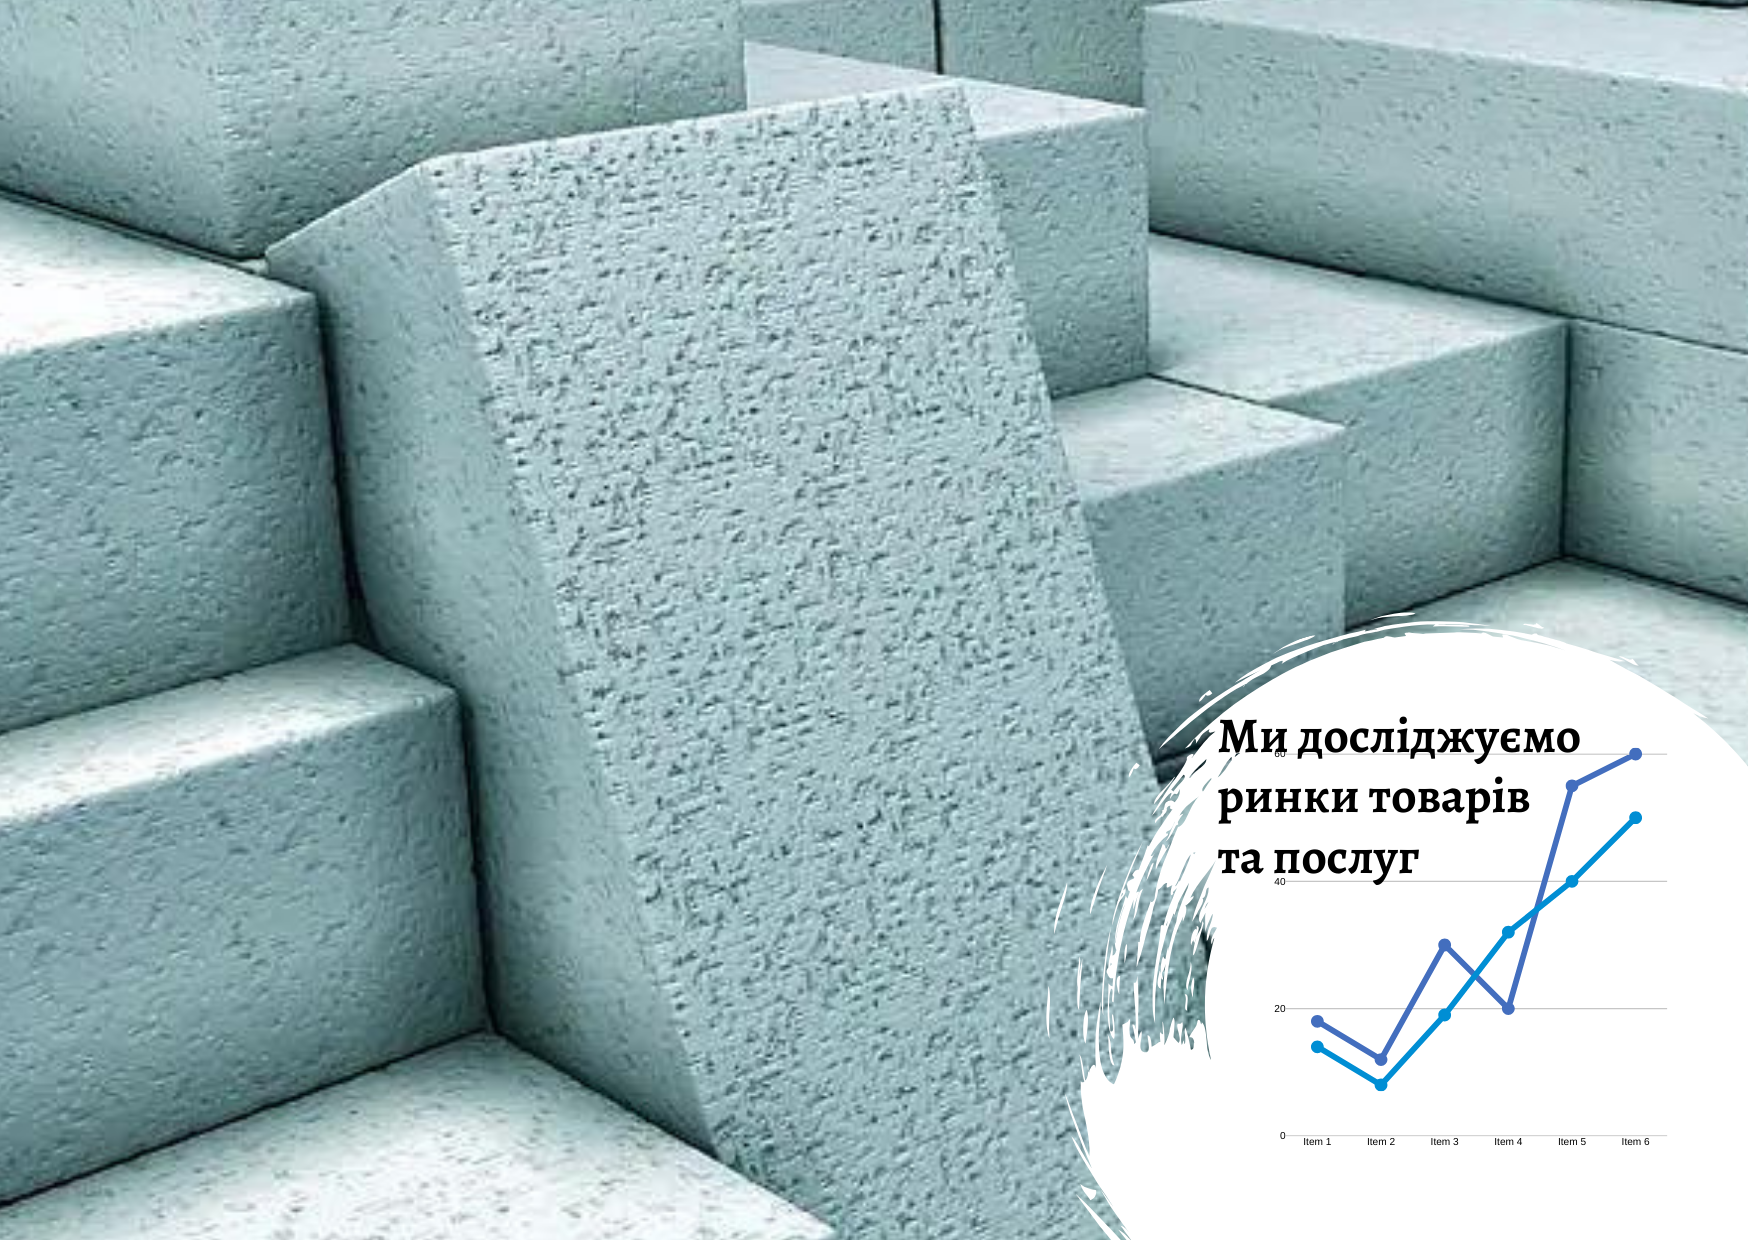 Polish, Slovakian, Romanian and Hungarian aerated concrete market research report